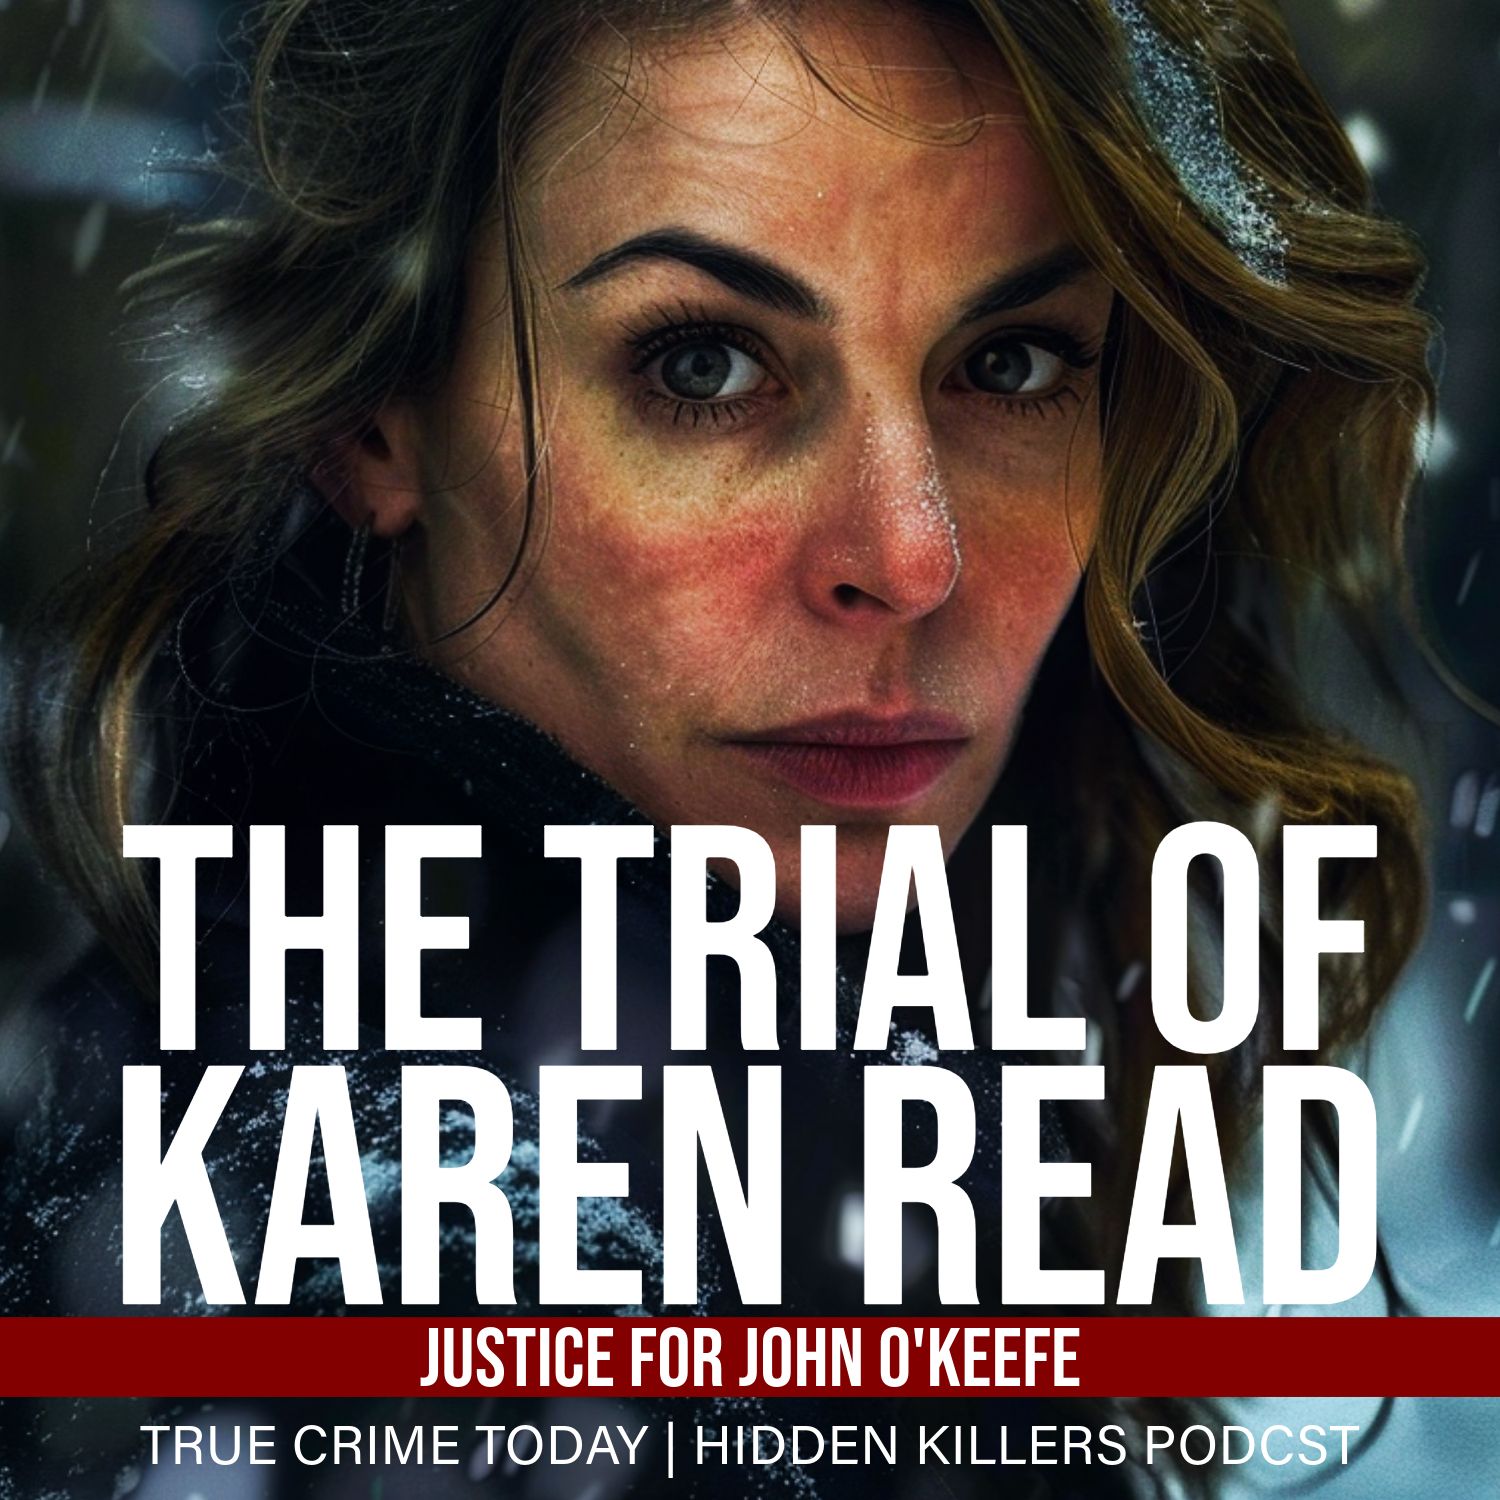 The Trial Of Karen Read | Justice For John O'Keefe Image